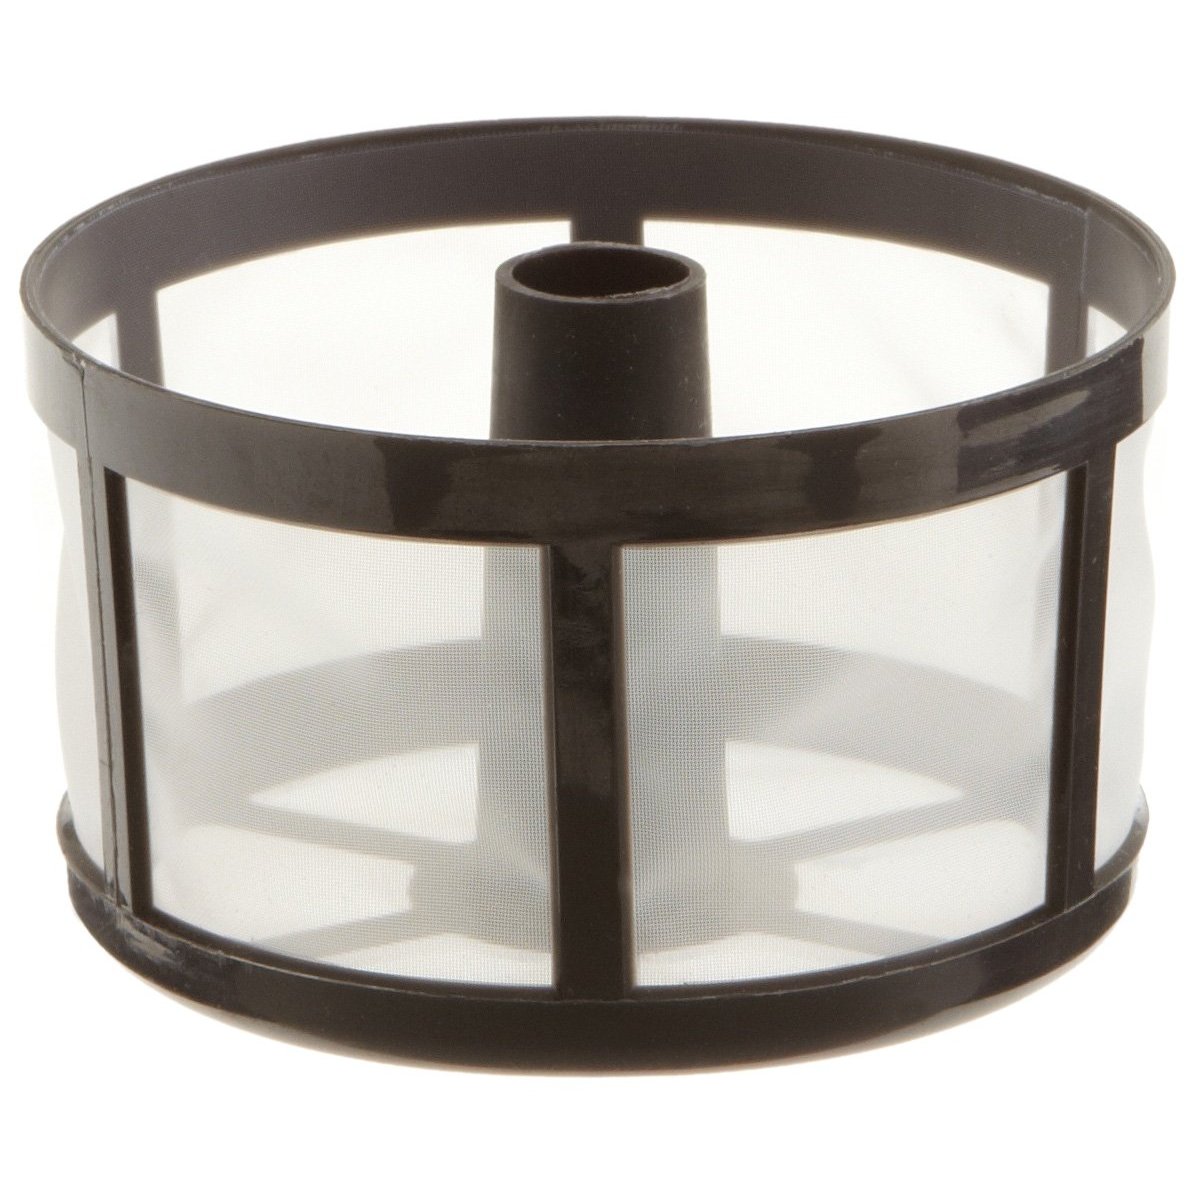 Perma-Brew 3 Year Re-useable Coffee Filter, Disk